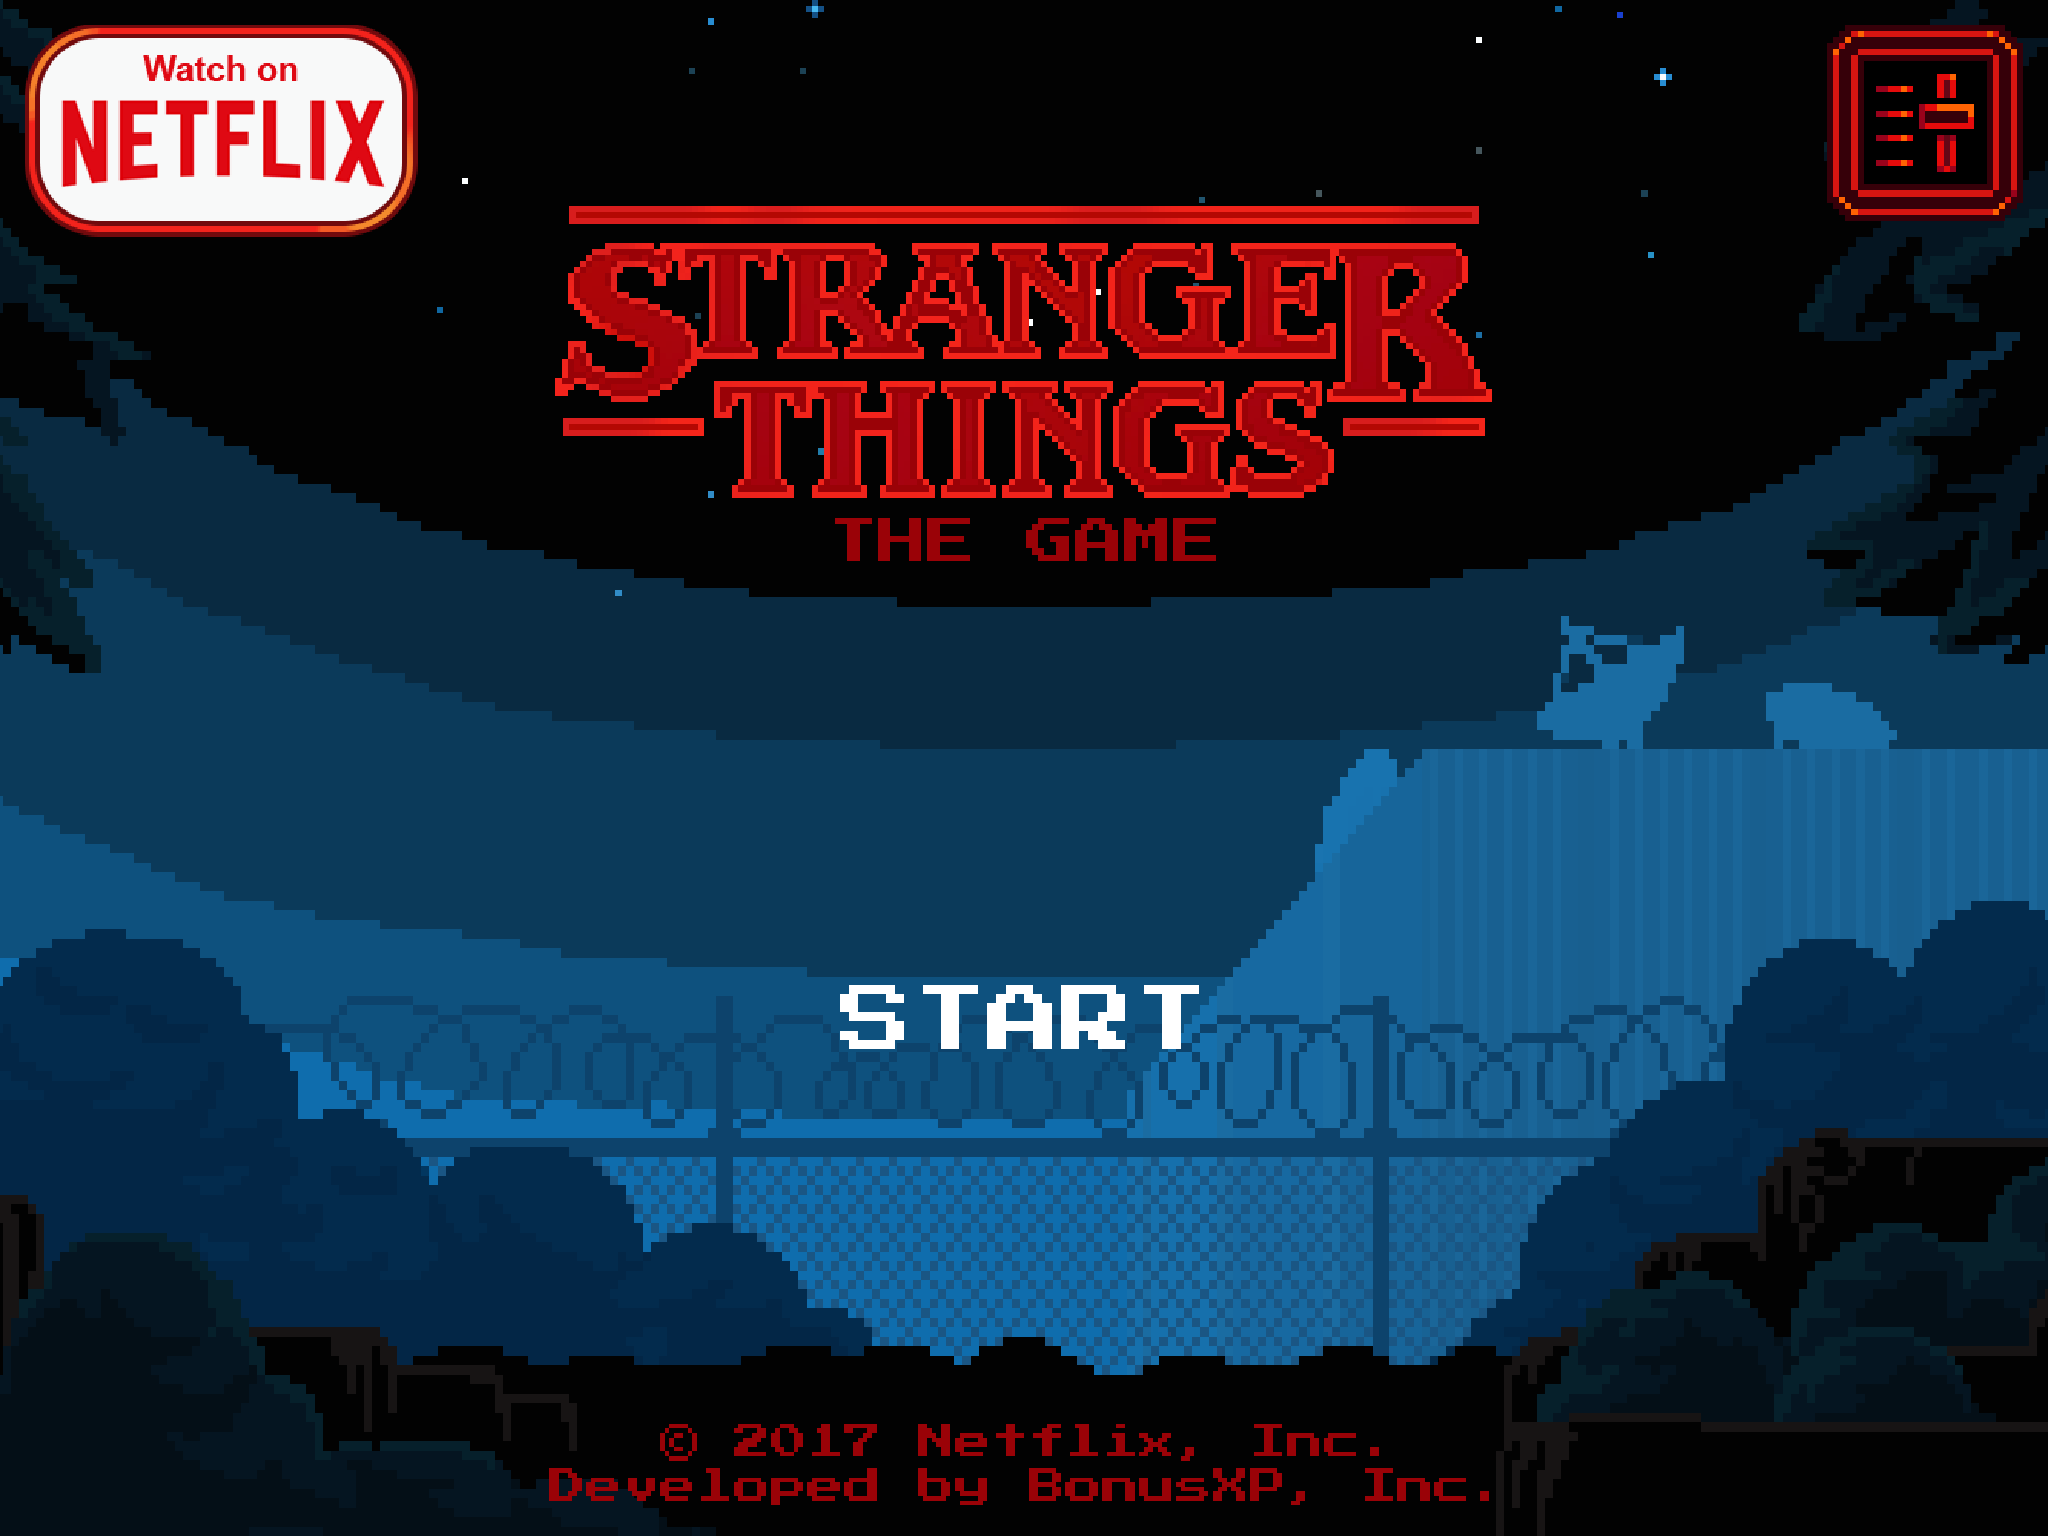 Stranger Things Gets A Mobile Game to Get you ready for Season 2